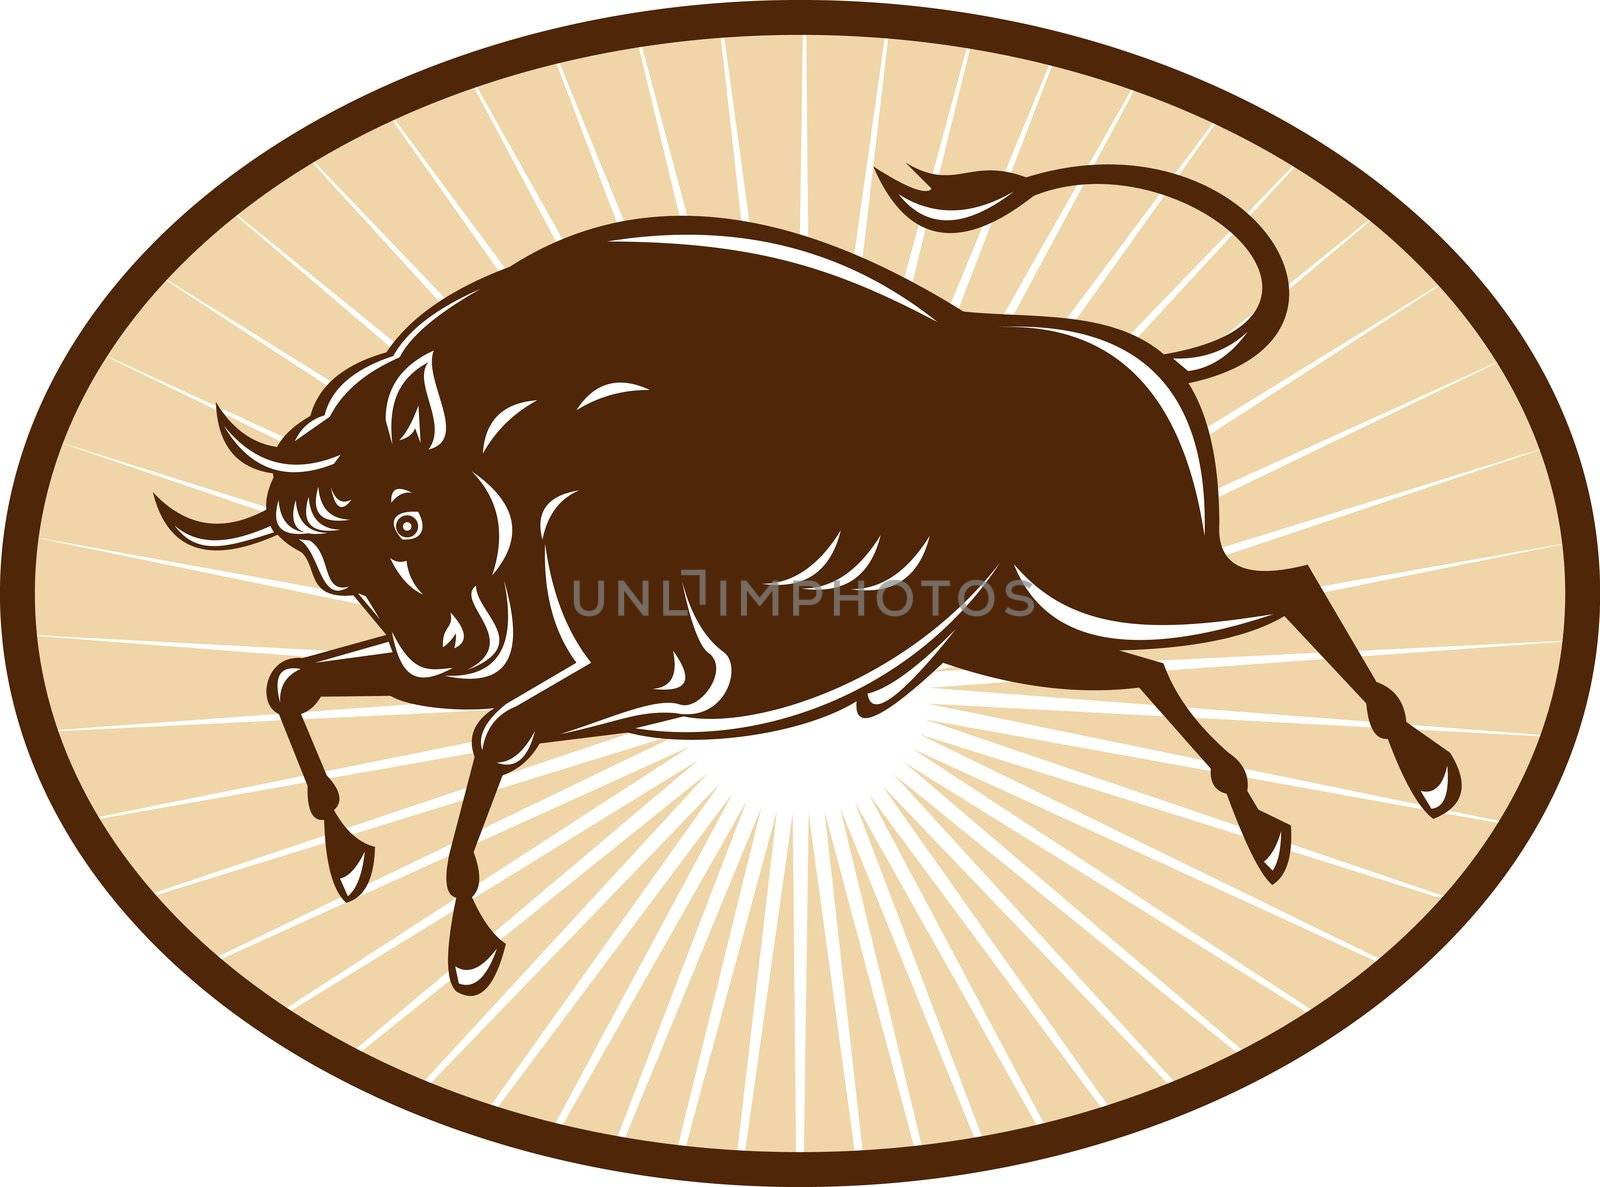 illustration of a Texas Longhorn Bull attacking viewed from side set inside an ellipse done in retro style.